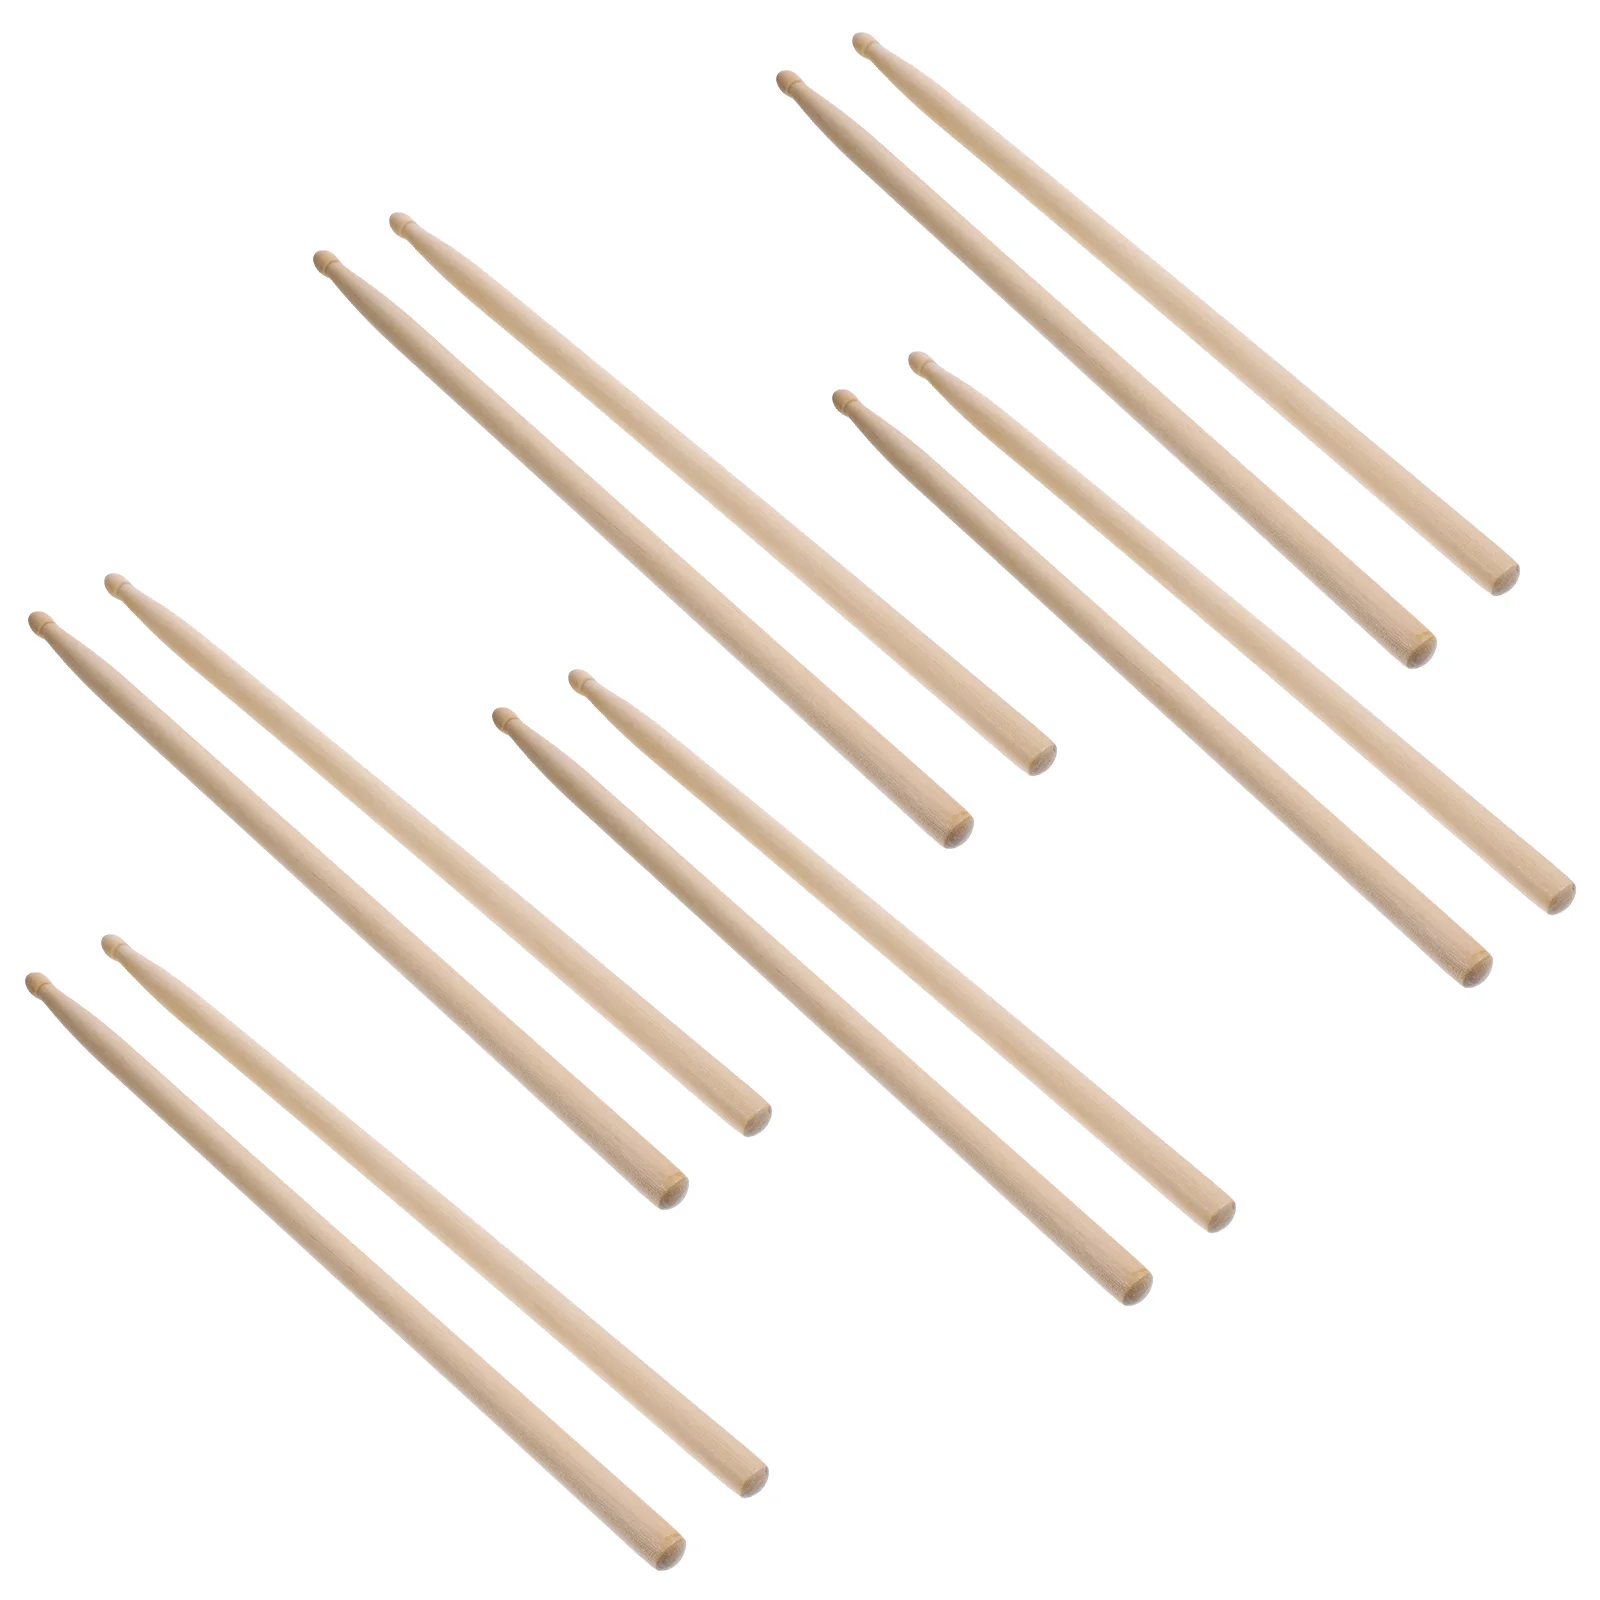 tongue drum drumstick percussion instrument mallets marimba drumsticks practice mallets for beginners Instrument Mallets 5a Maple Wood Sticks Musical Instruments Drumsticks For Practice